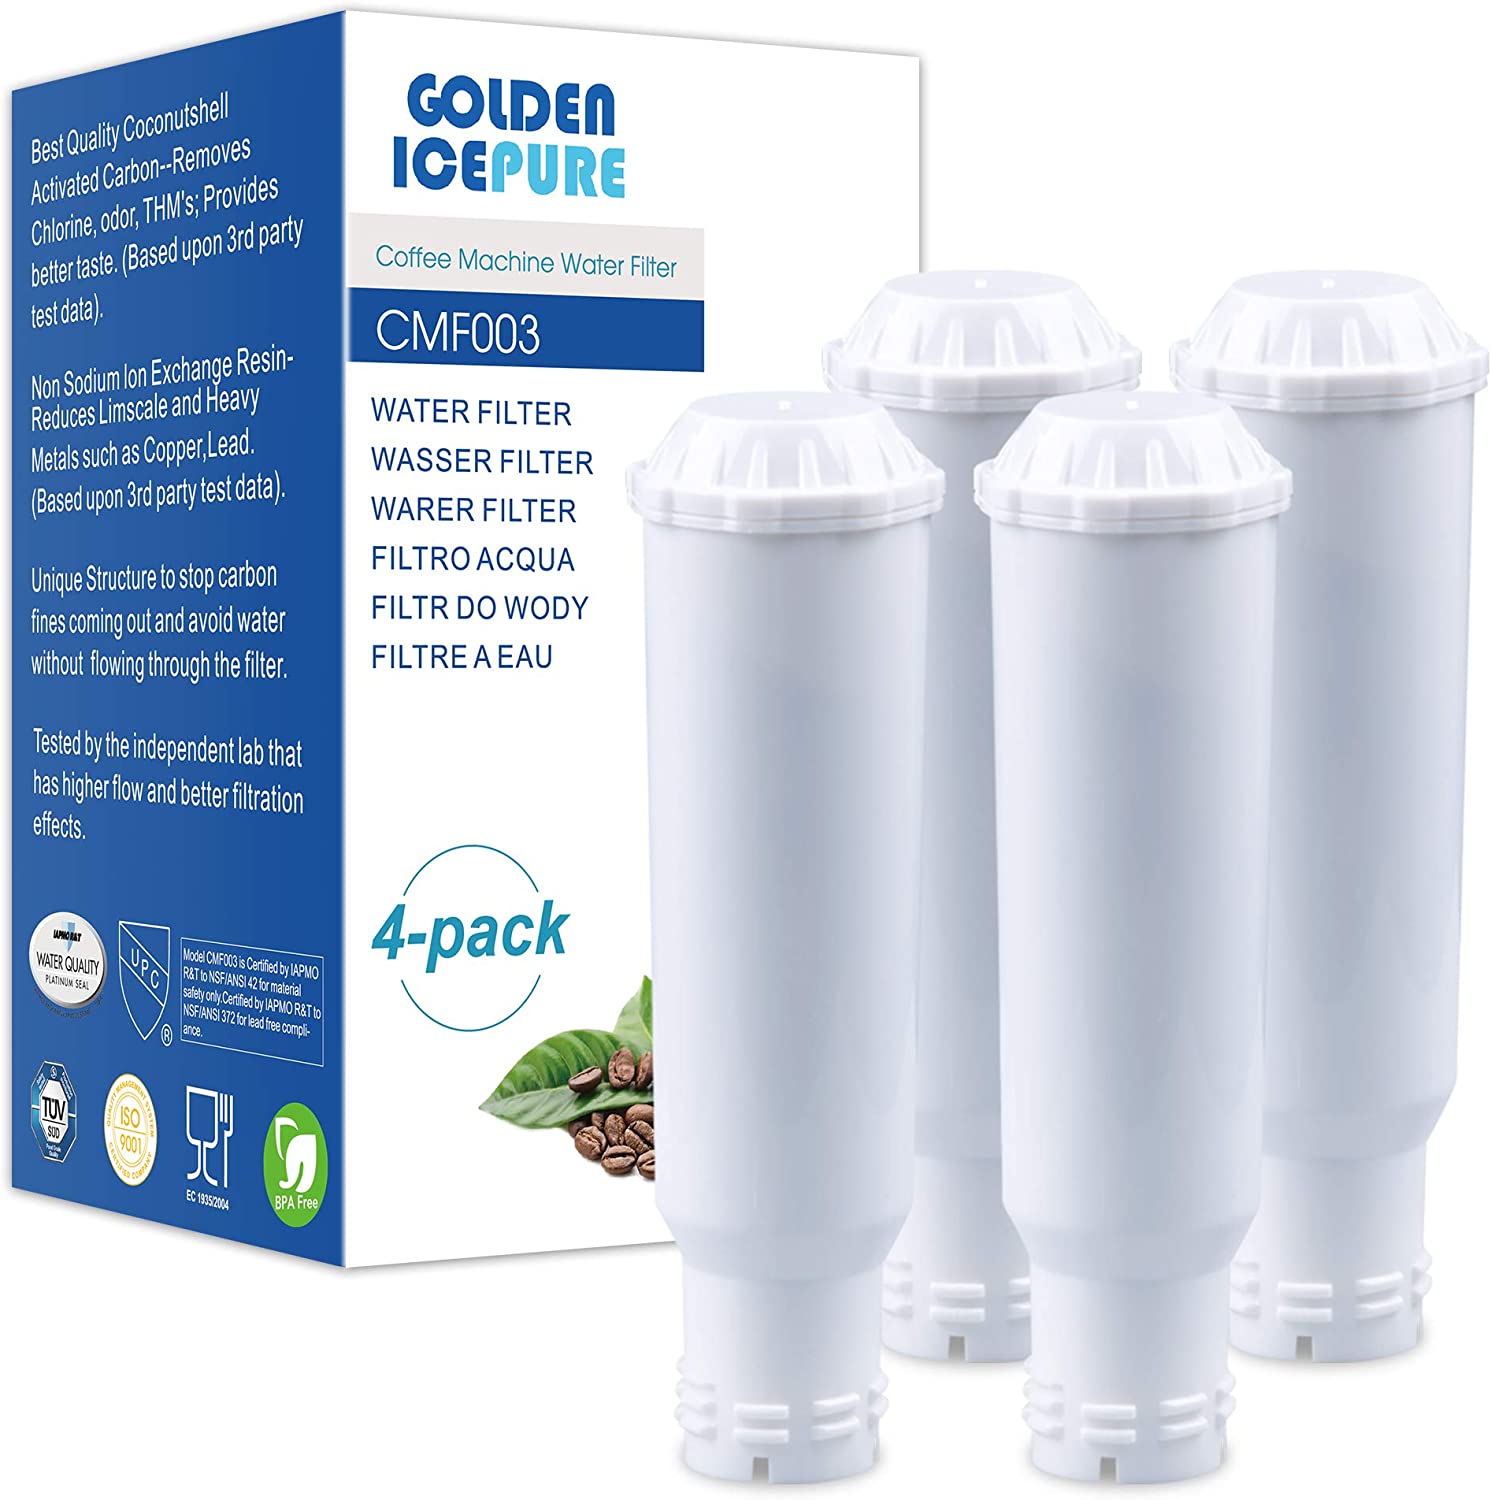 GOLDEN ICEPURE TÜV SÜD certified coffee filter, compatible with Krups Claris F088 Melitta Pro Aqua, fits many models from AEG, Bosch, Siemens, Nivona, Melitta 4 pieces from Golden Iceppure (invoice available)